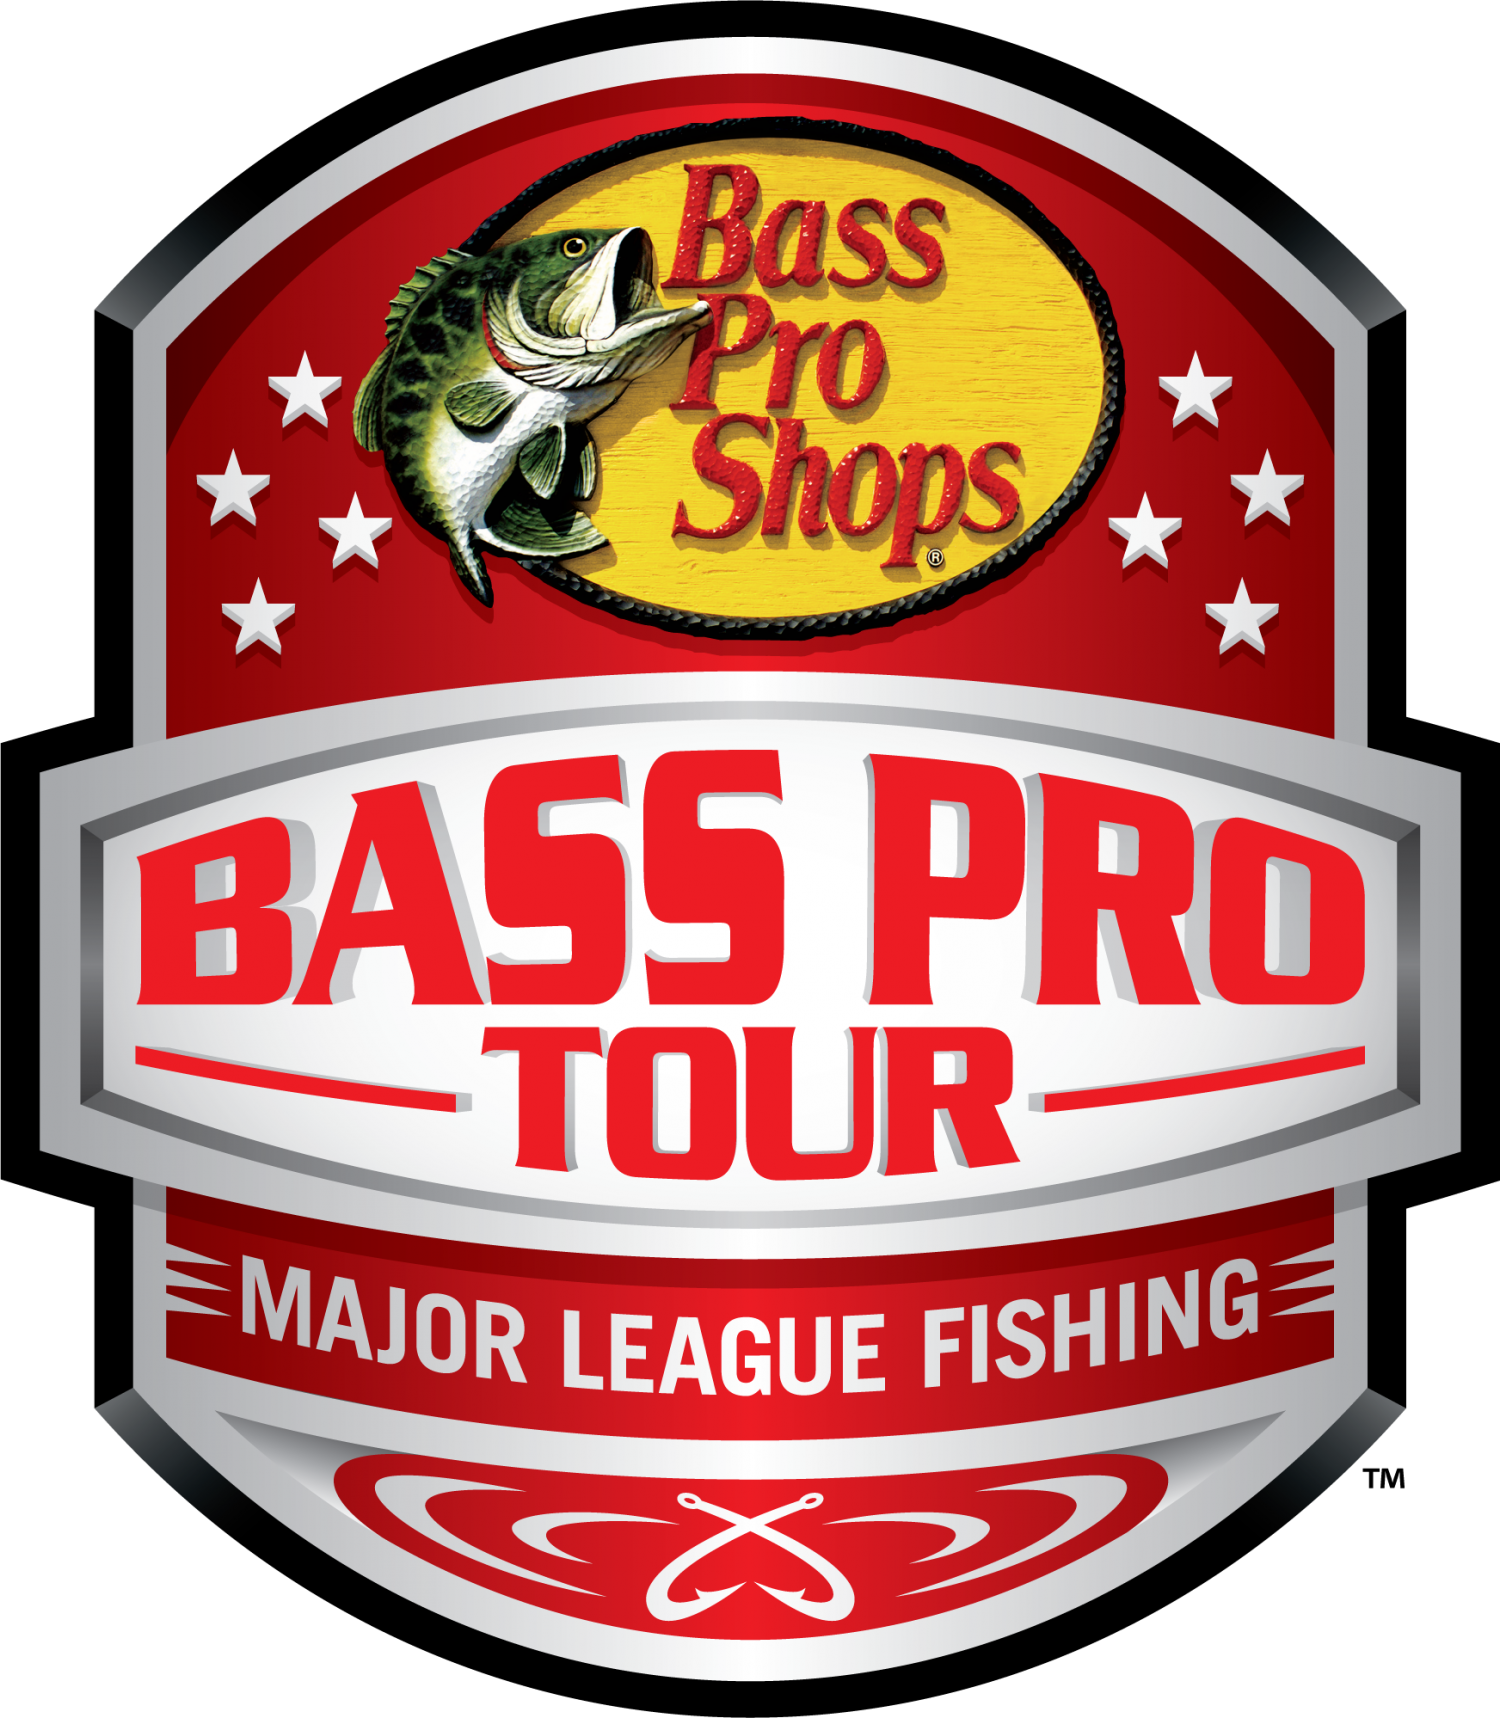 Major League Fishing names Beshears Tournament Director – Anglers Channel